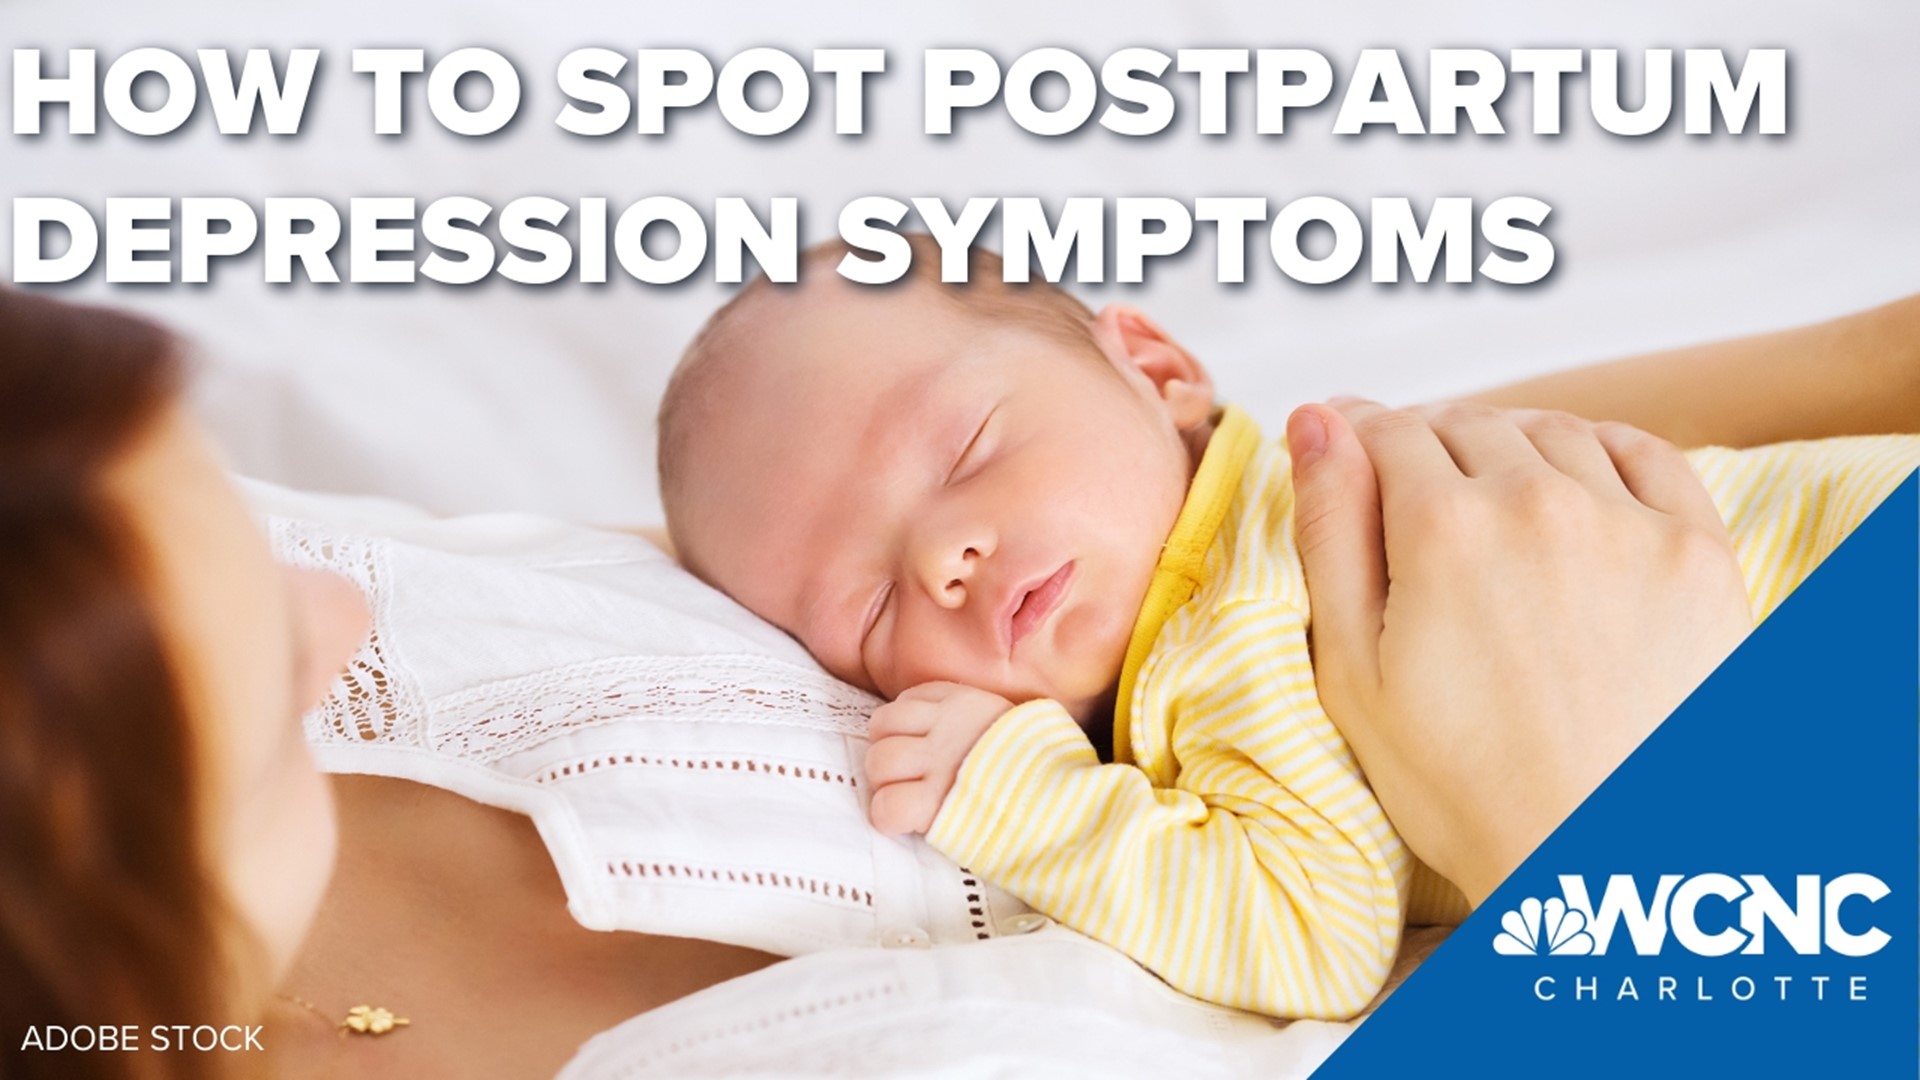 Postpartum depression is a serious condition that can impact the well-being of the entire family, especially the mother.